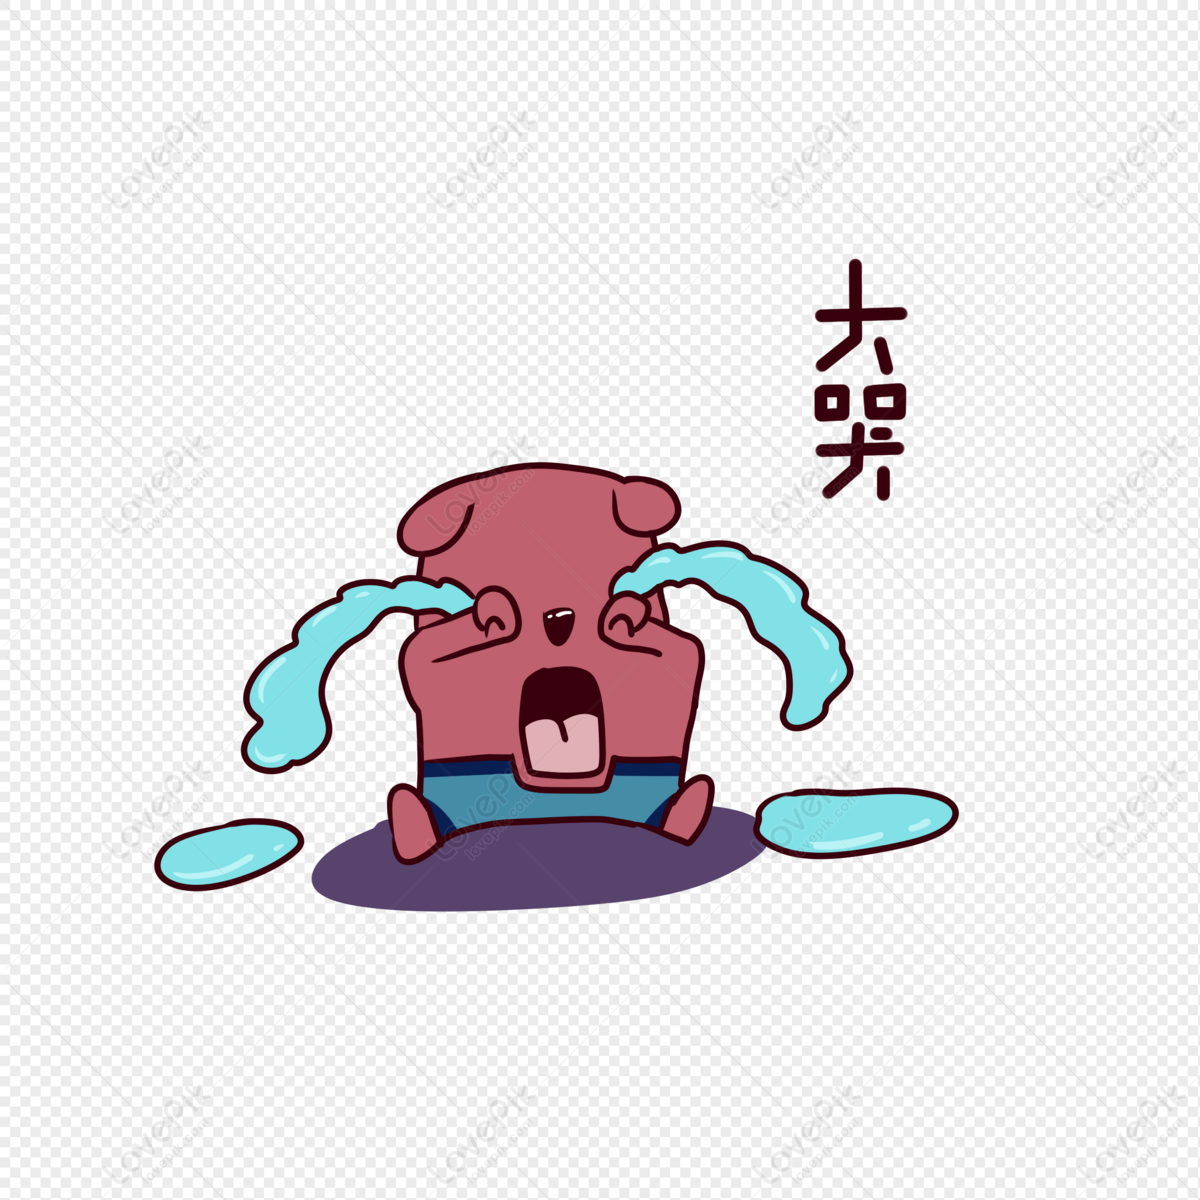 Sweet Potato Bear Cartoon Crying Expression Pack PNG Picture And Clipart  Image For Free Download - Lovepik | 401144255